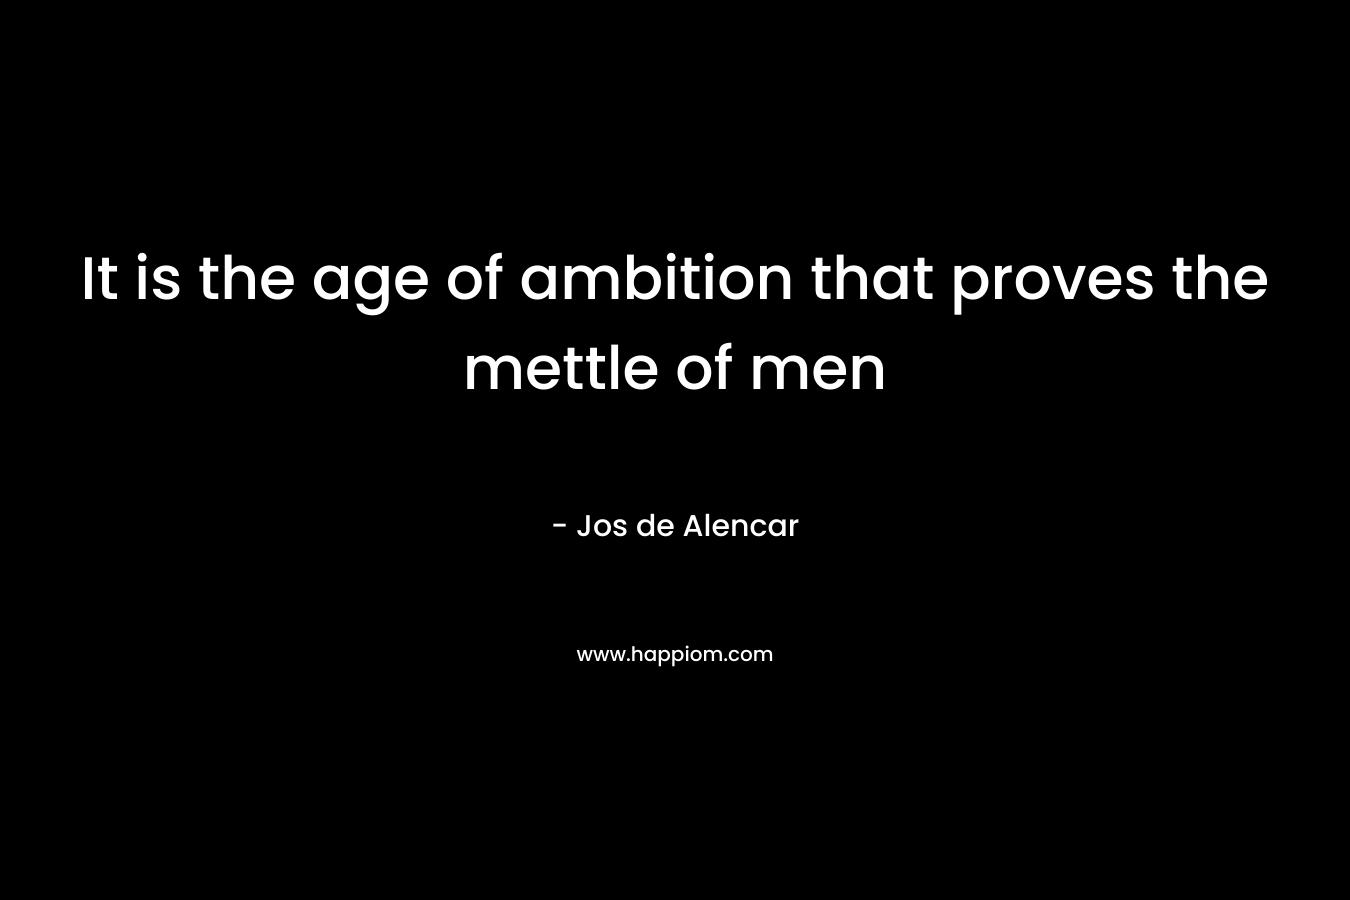 It is the age of ambition that proves the mettle of men